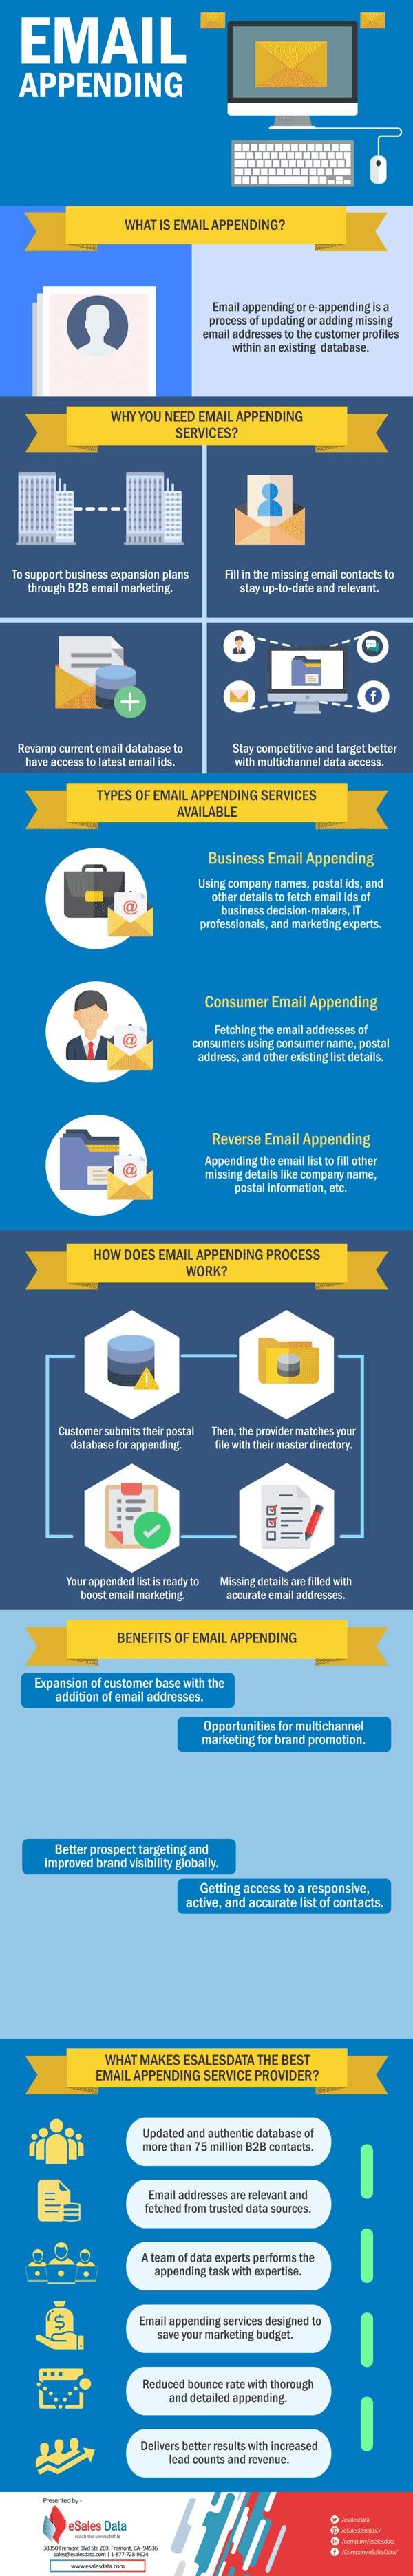 Email Appending